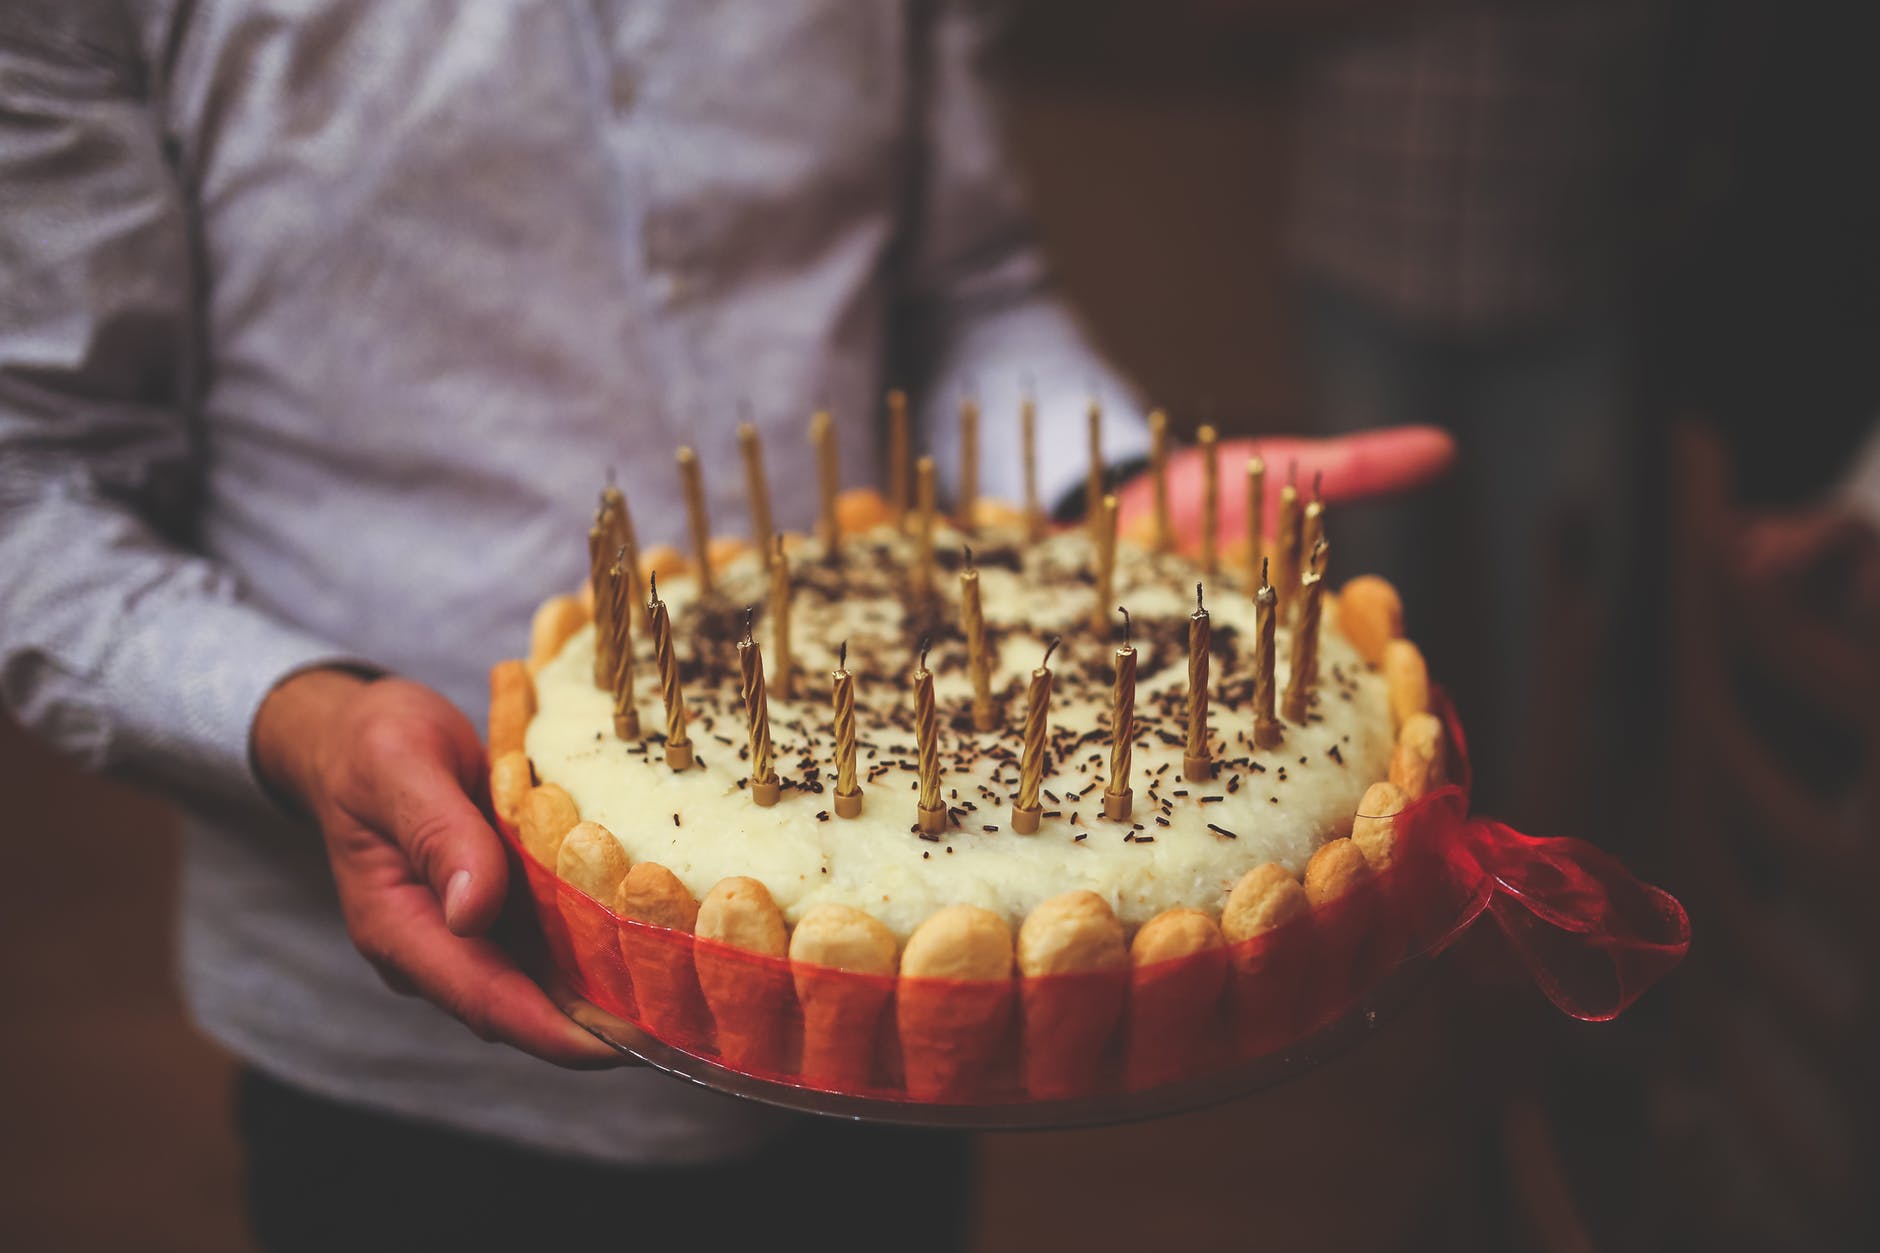 SOME WONDERFUL IDEAS TO CELEBRATE YOUR FATHER’s BIRTHDAY